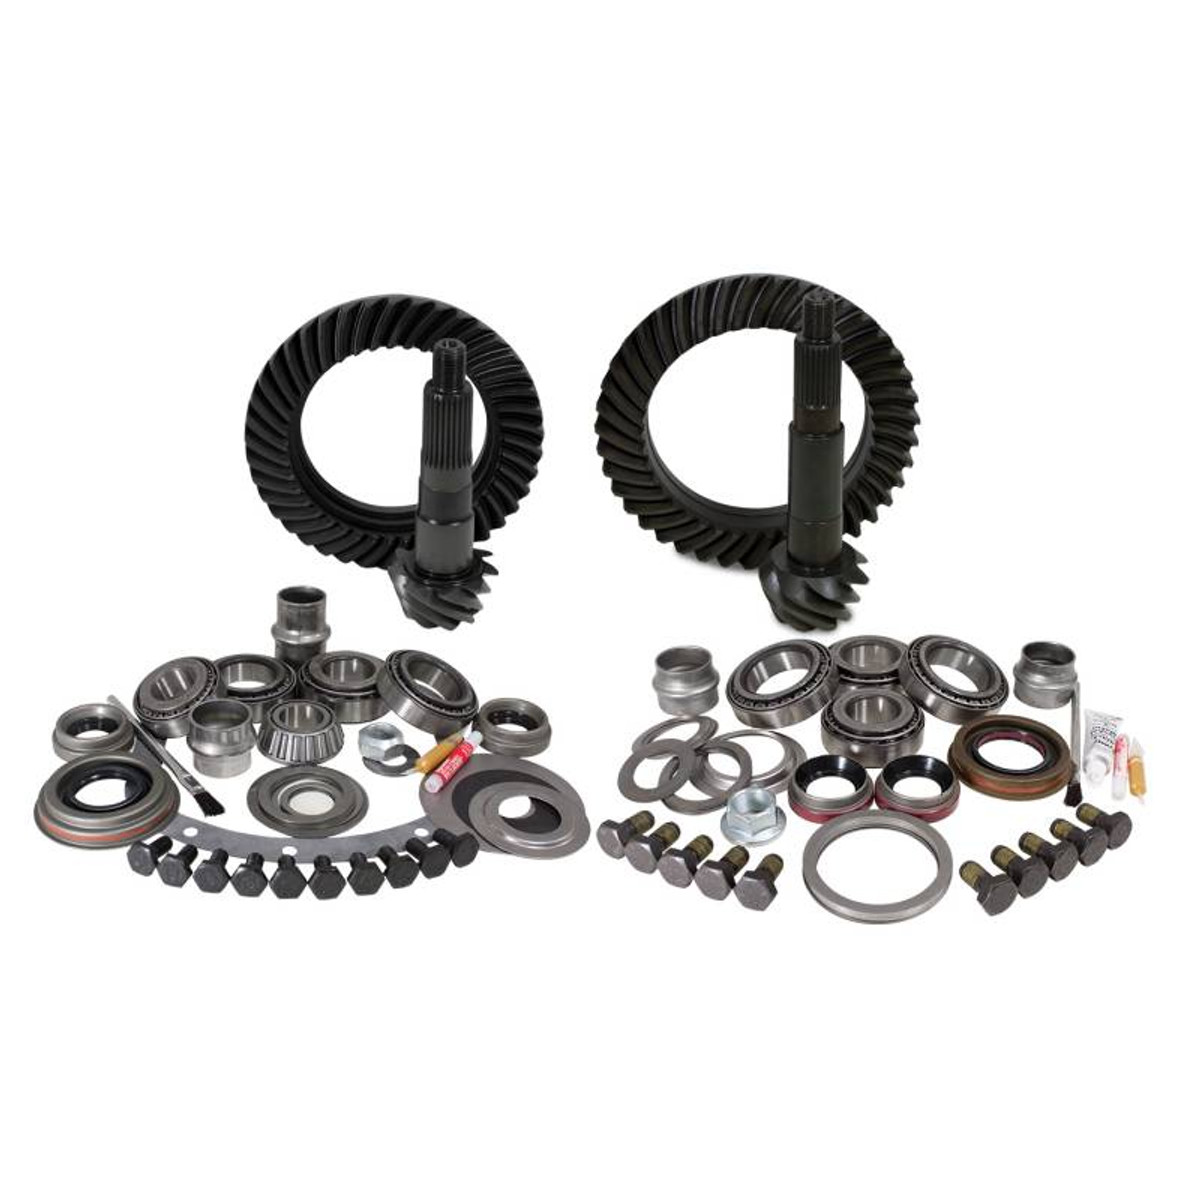 Yukon Gear And Install Kit Package For Jeep XJ With Dana 30 Front And Chrysler 8.25 Inch Rear 4.88 Ratio YGK004